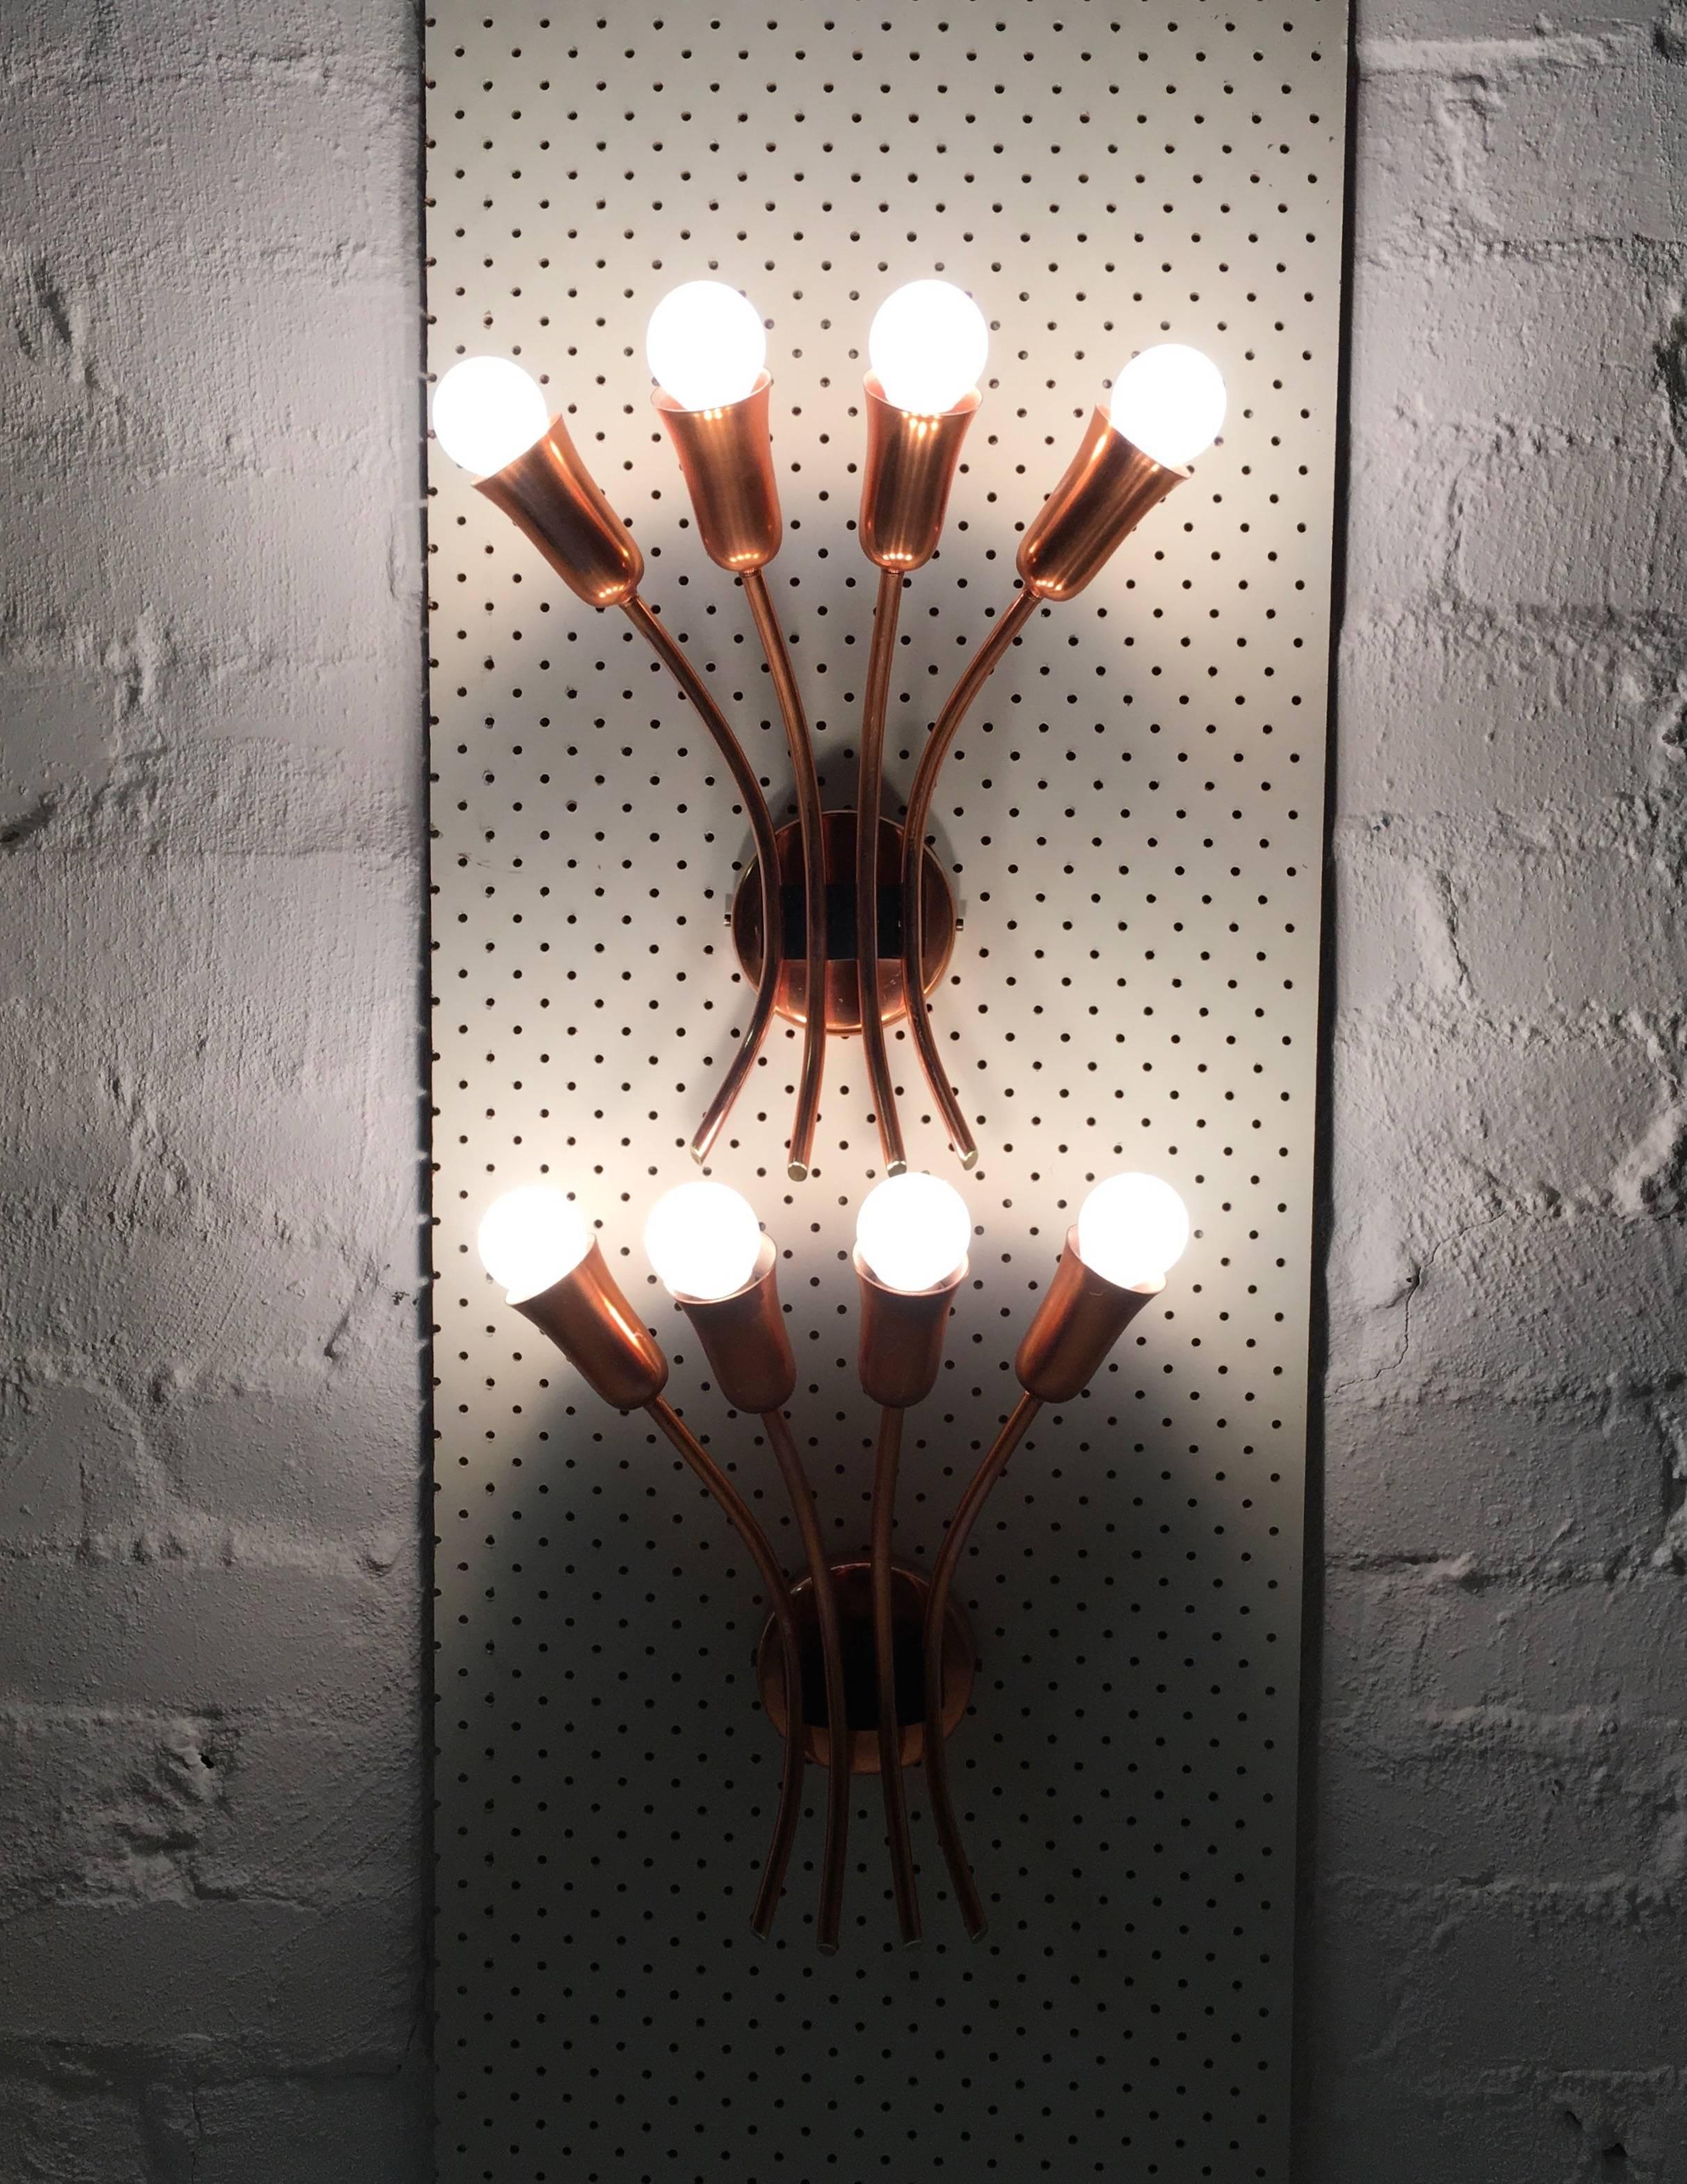 This magnificent pair of copper wall sconces in the style of Stilnovo was a private commission for a 1950s Melbourne architectural project in Caulfield. The lighting was designed and produced by Brown Evans and Co. (BECO) in close consultation with